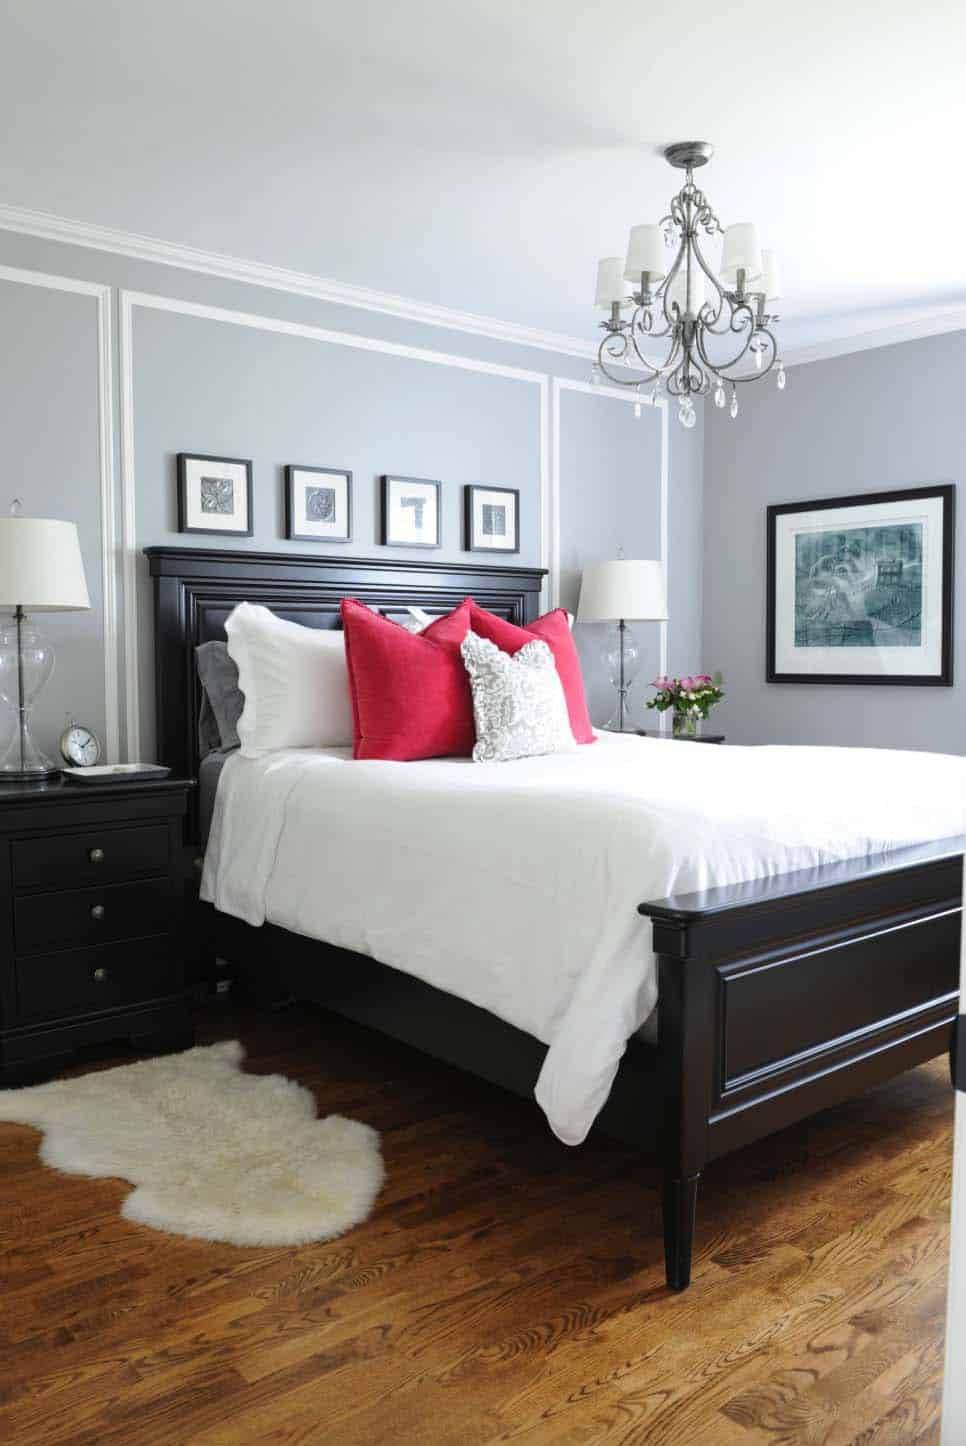 25 Absolutely Stunning Master Bedroom Color Scheme Ideas,Beautiful Flower Images To Draw